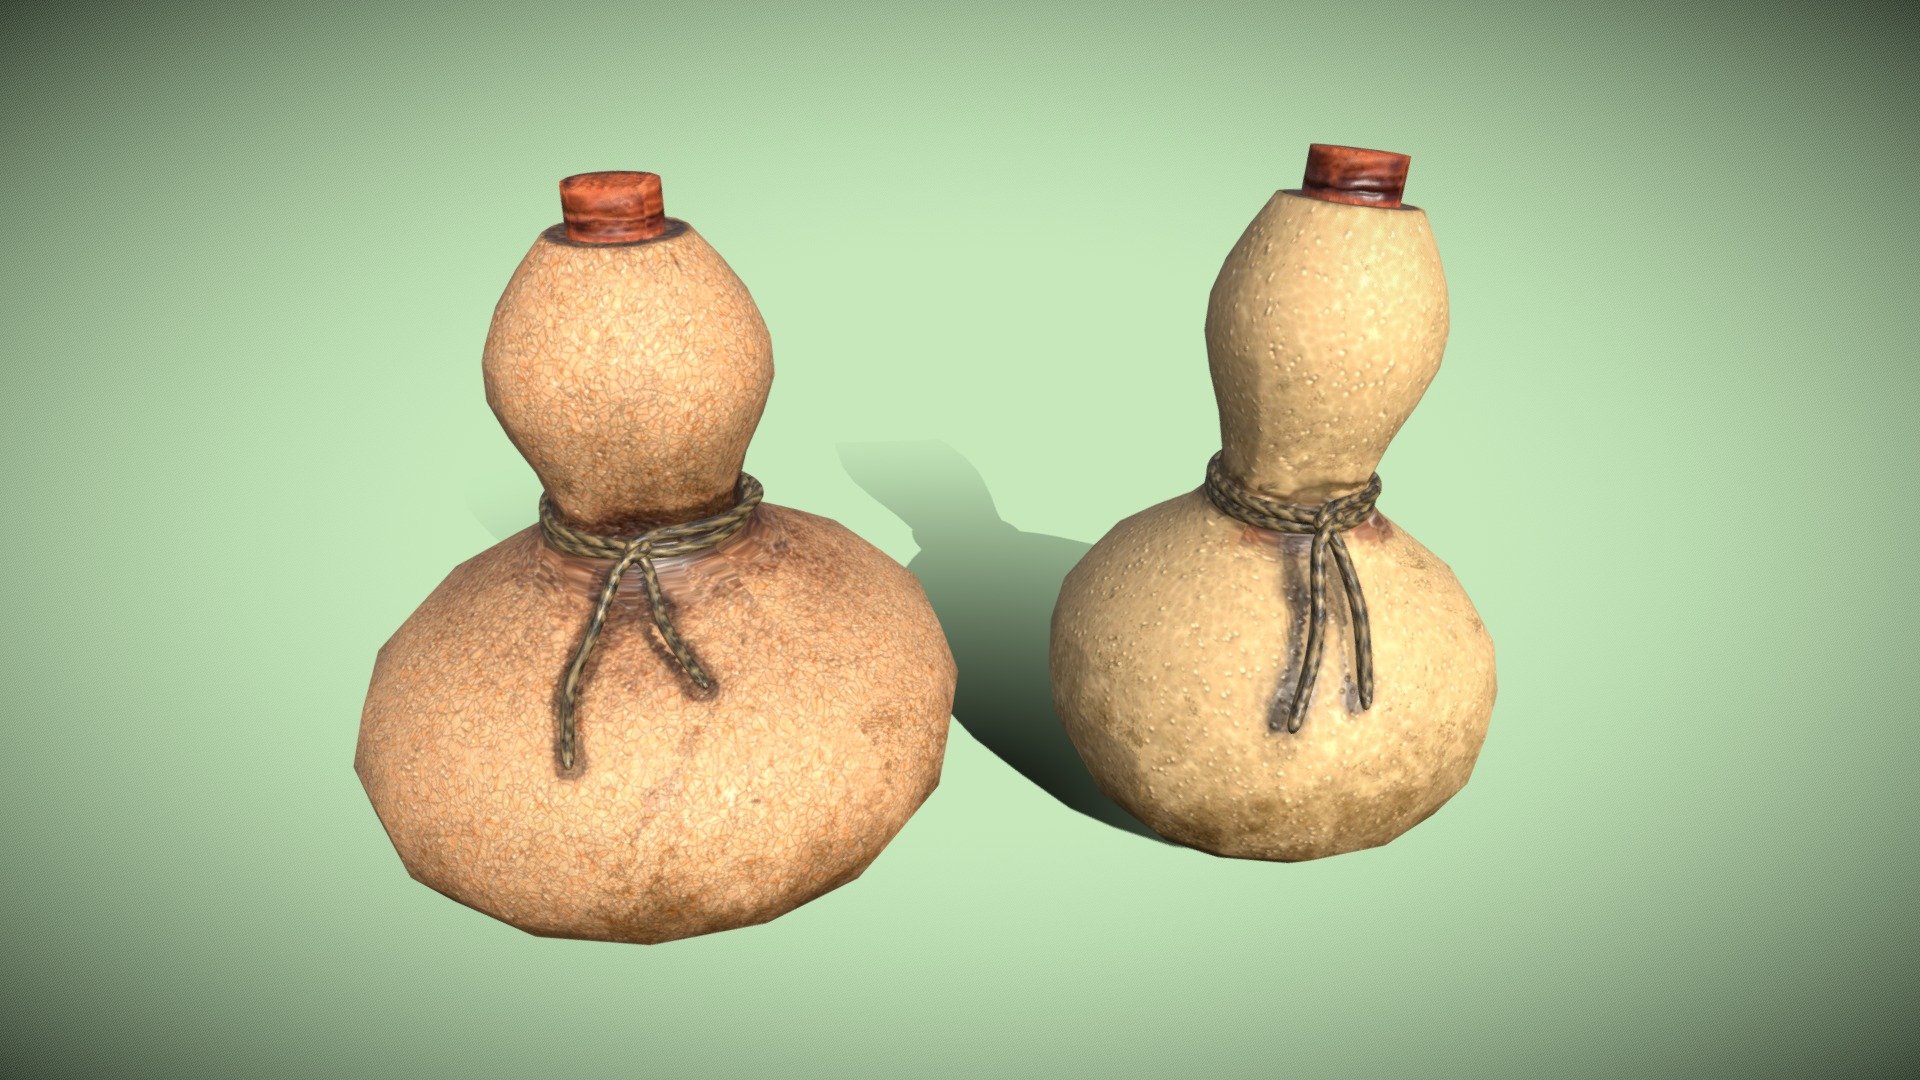 Pumpkin gourds, containers, bottles of water, wine, olive oil, etc&hellip; To decorate in a house or traditional environment, to place in transport, on horseback, in a cart, I would have the person transport it themselves. Models in FBX and Blend. The two gourds are textured in PBR 2048. The ropes are also in PBR size 512 3d model